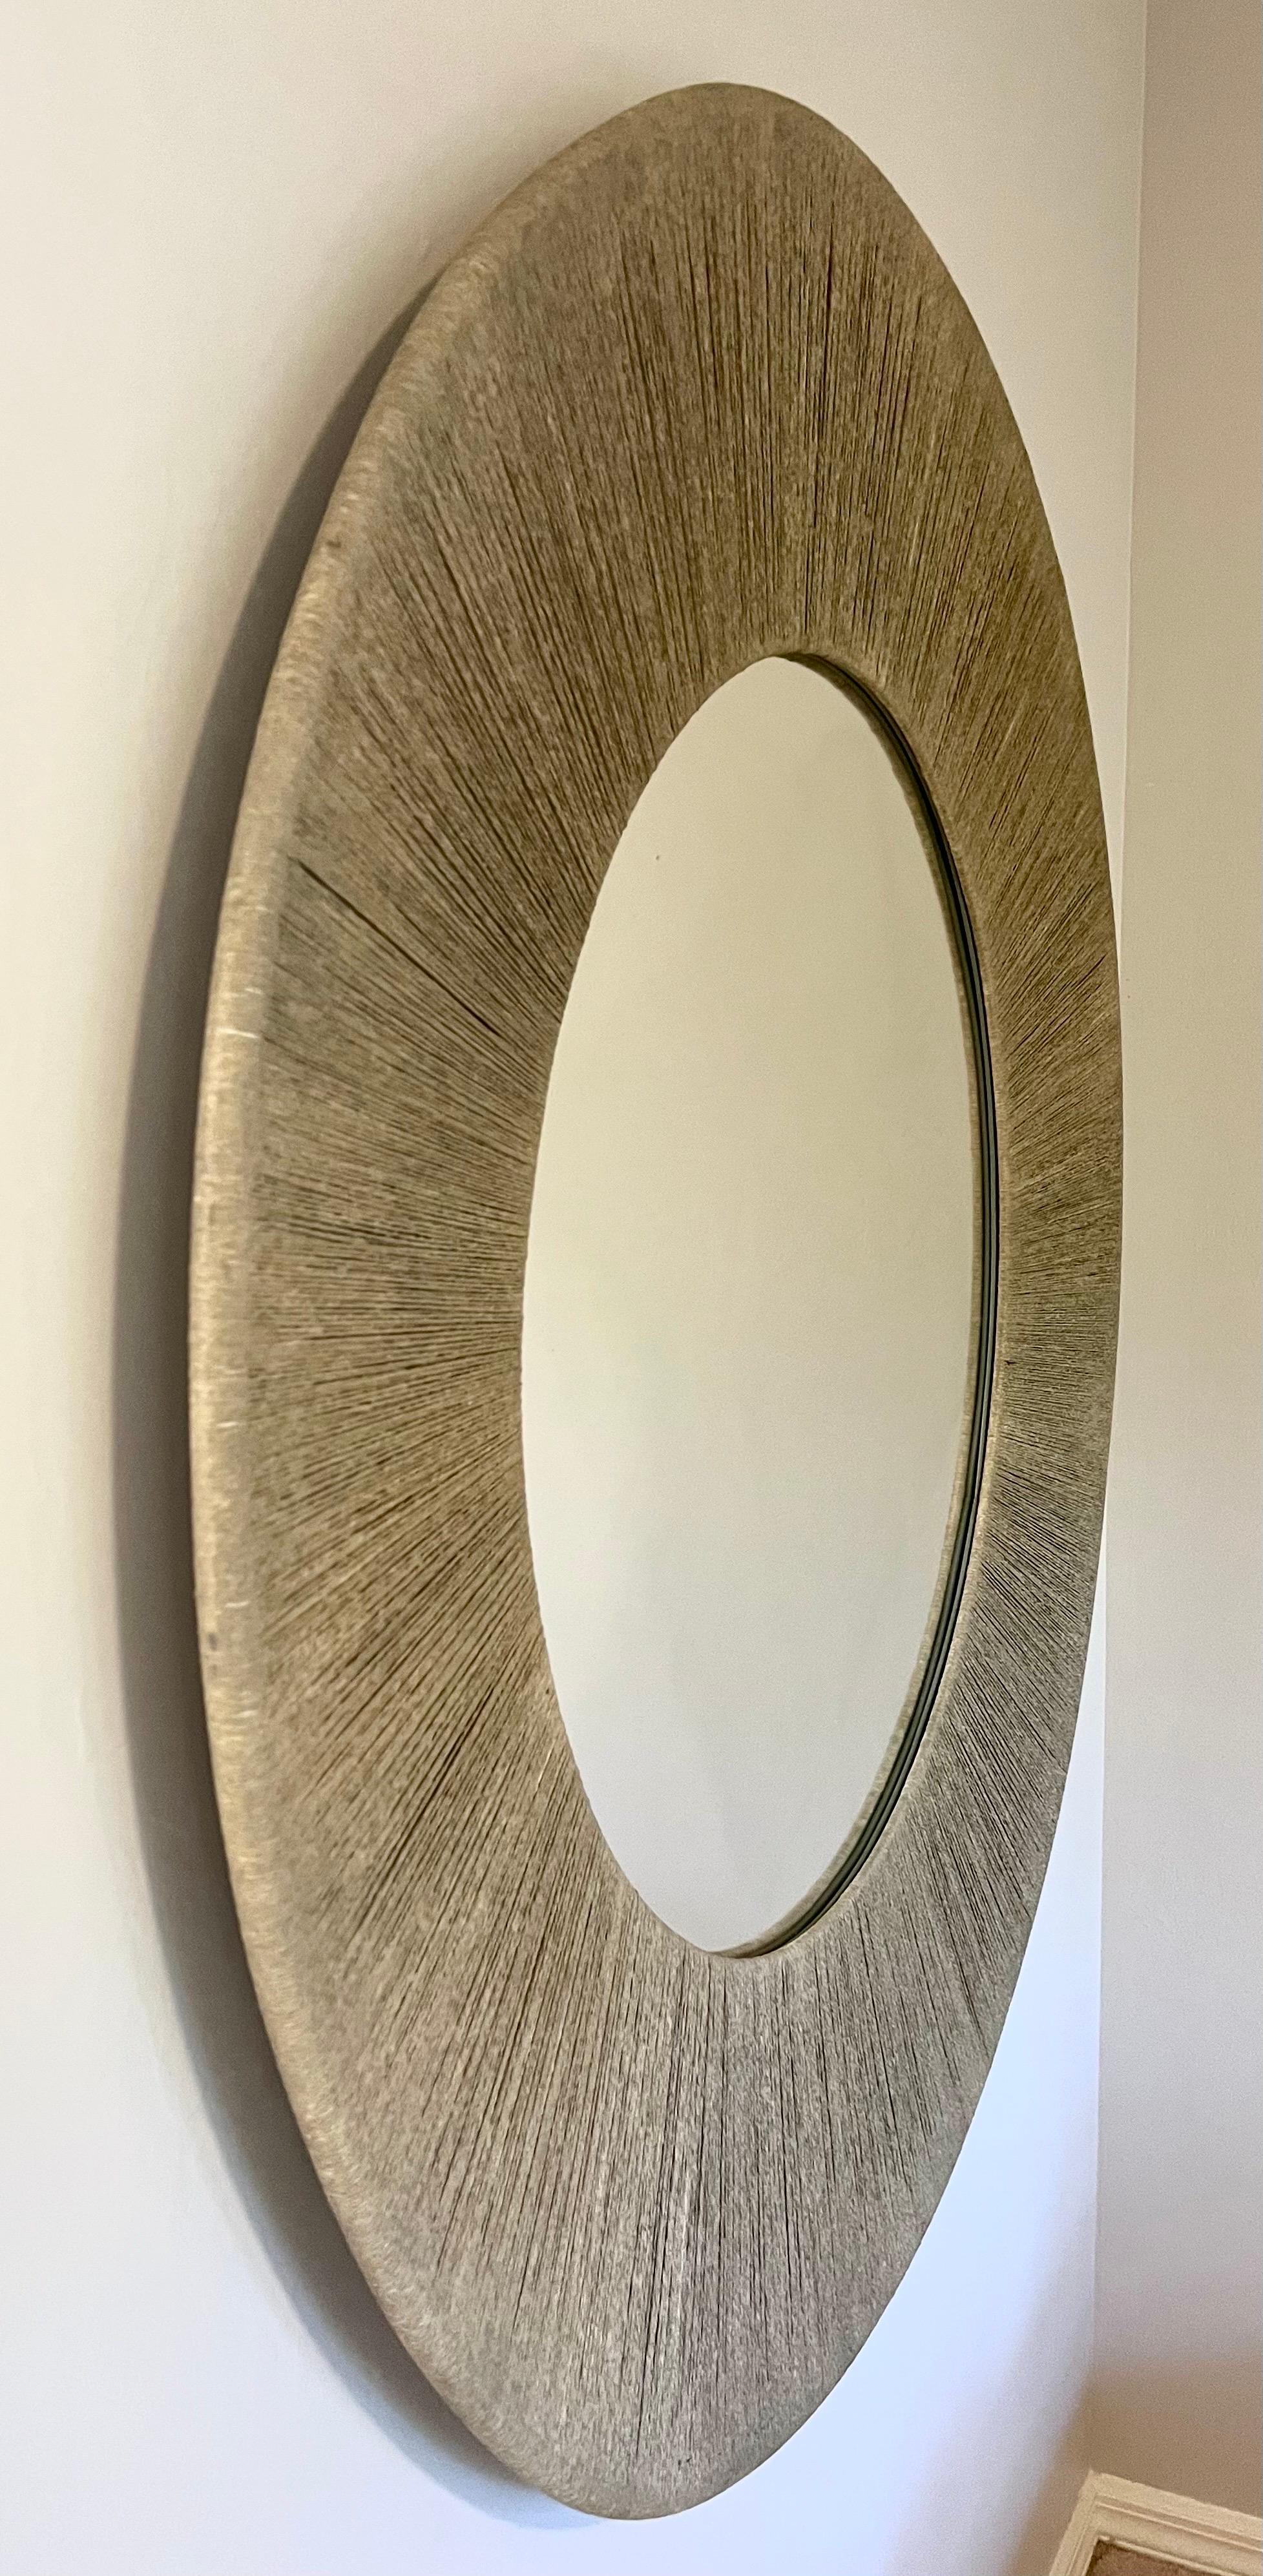 Hand-Crafted Large Round French Modern Craftsman Sunburst Mirror in Cord & Rope, Audoux Minet For Sale